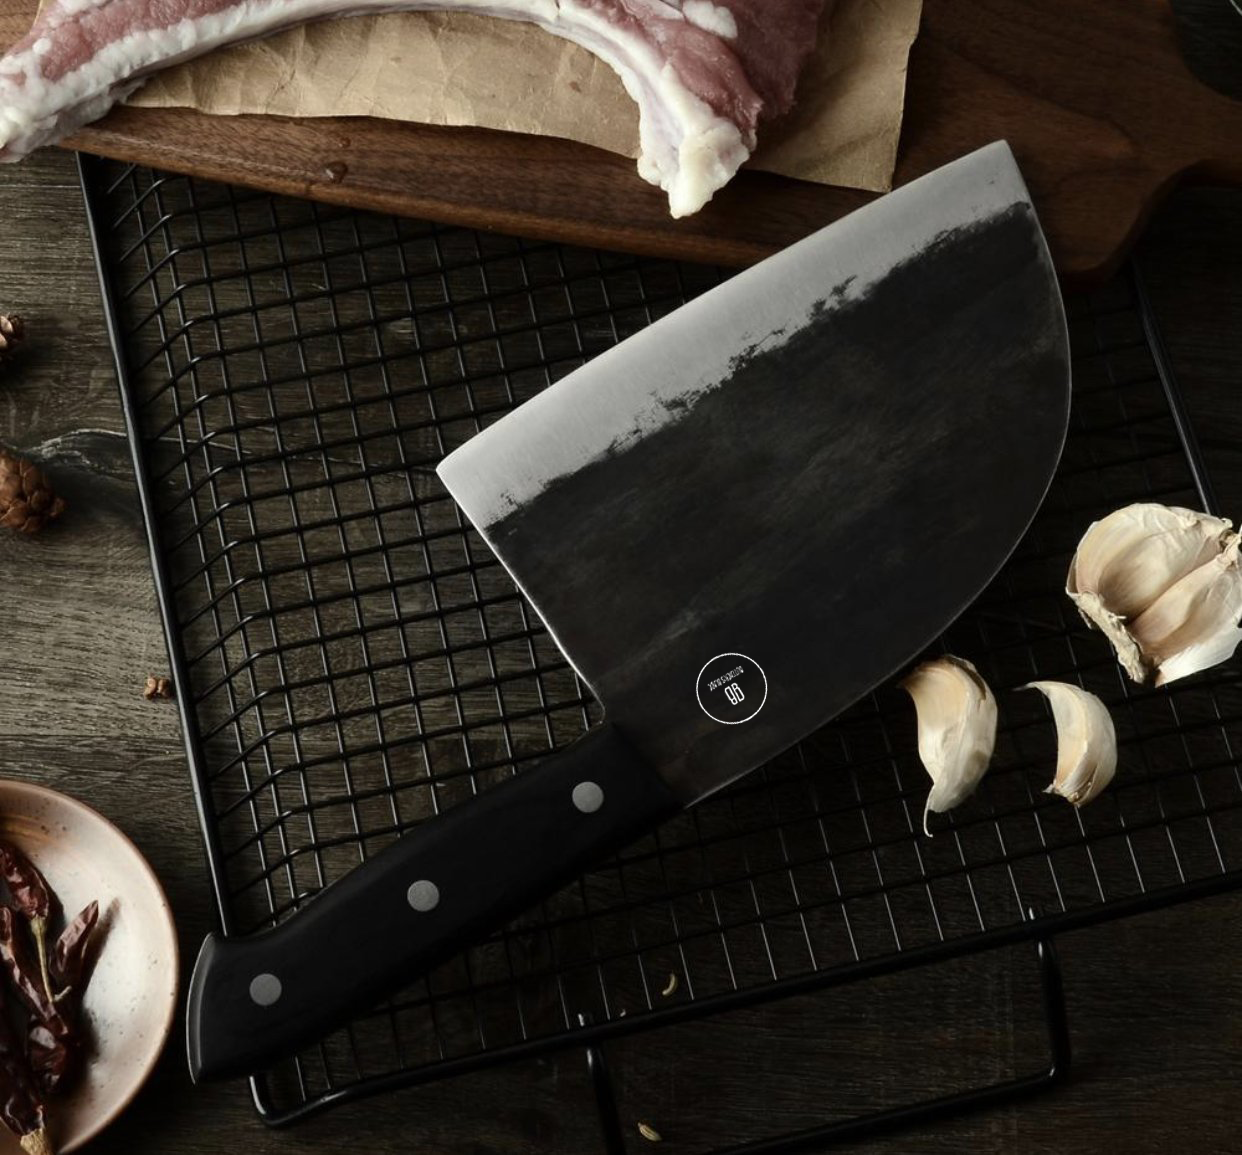 When you need a Big Heavy knife that will cut thru Chicken bones no problem but slice a tomato paper thin, this beast is for you. It is heavy and makes cutting almost anything feel like slicing thru butter.  Projama , crooked butcher